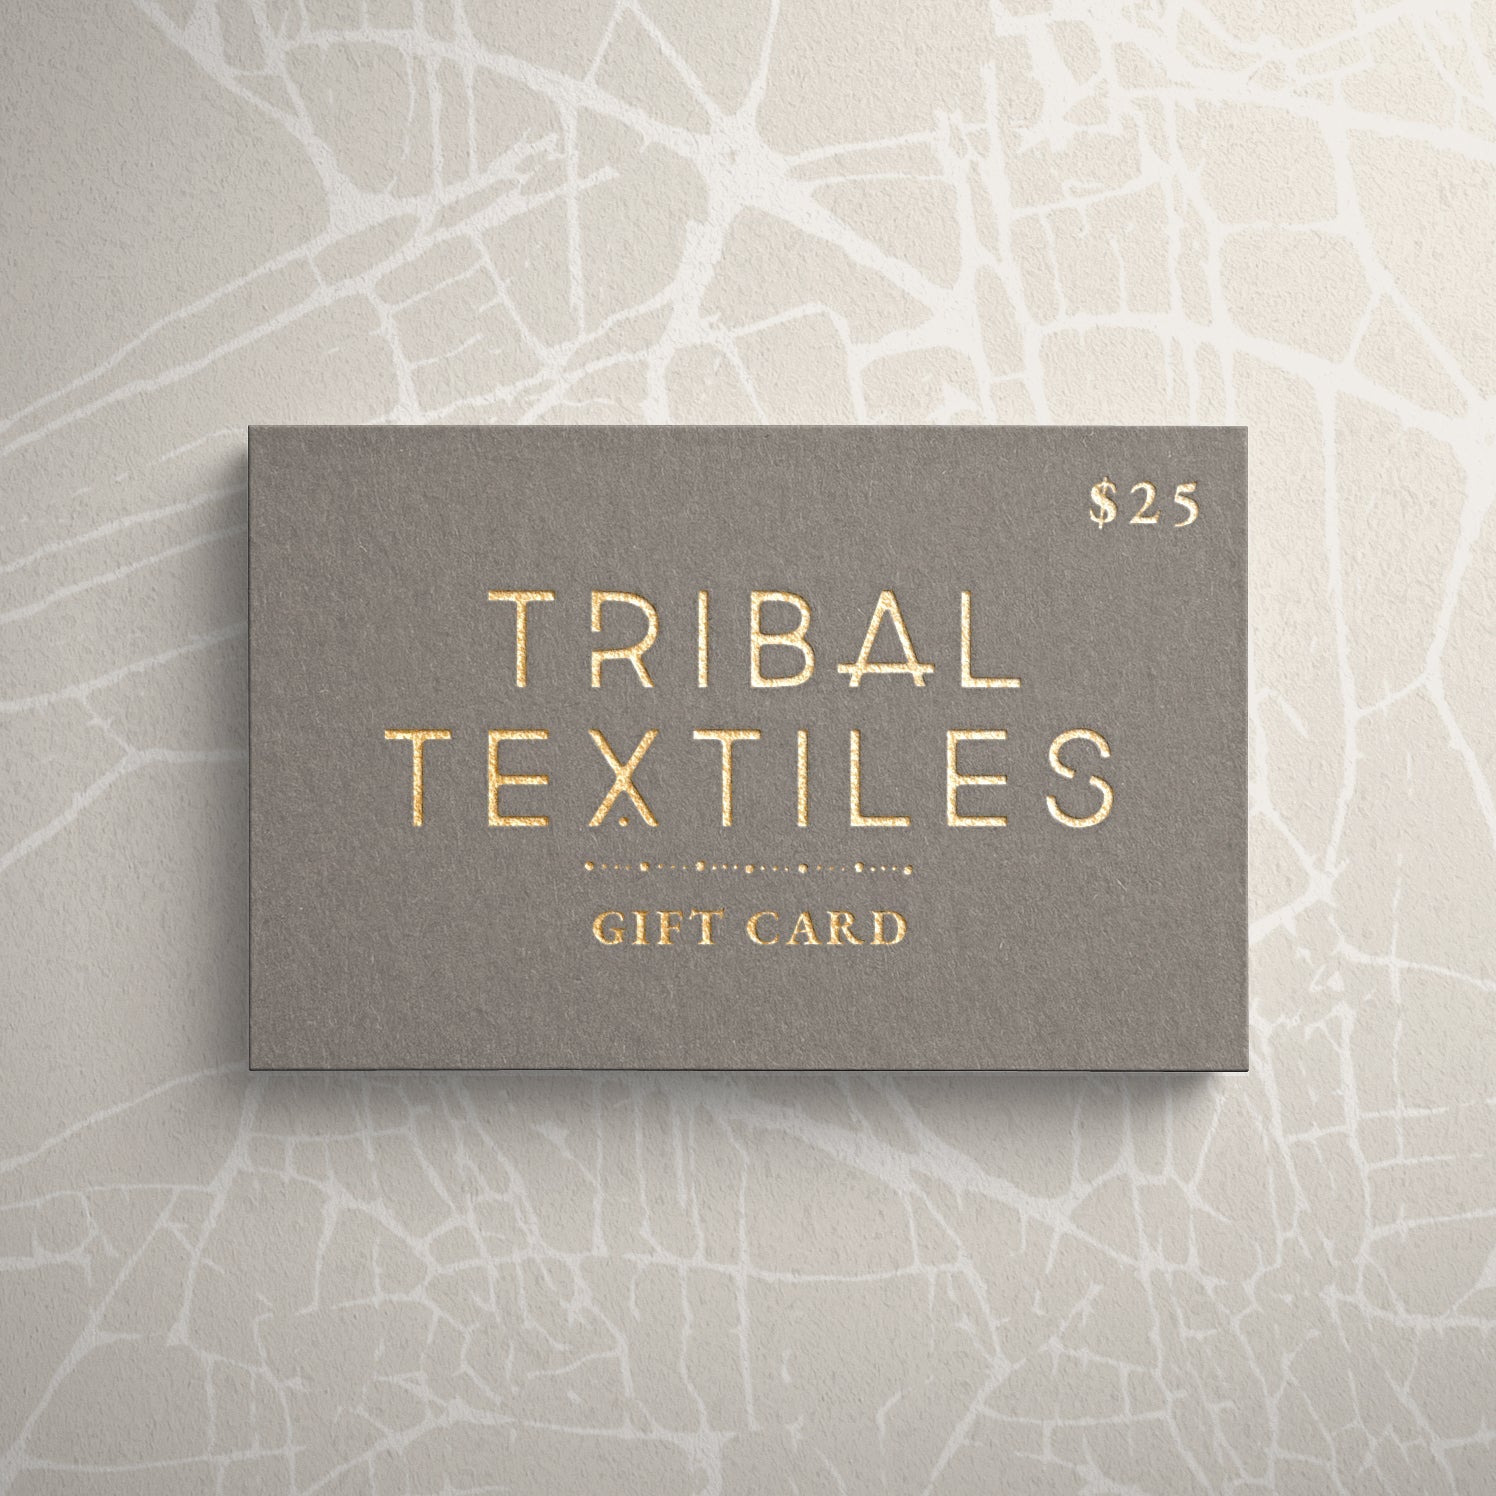 Virtual Gift Card - Gift Card by TRIBAL TEXTILES - Handcrafted Home Decor Interiors - African Made